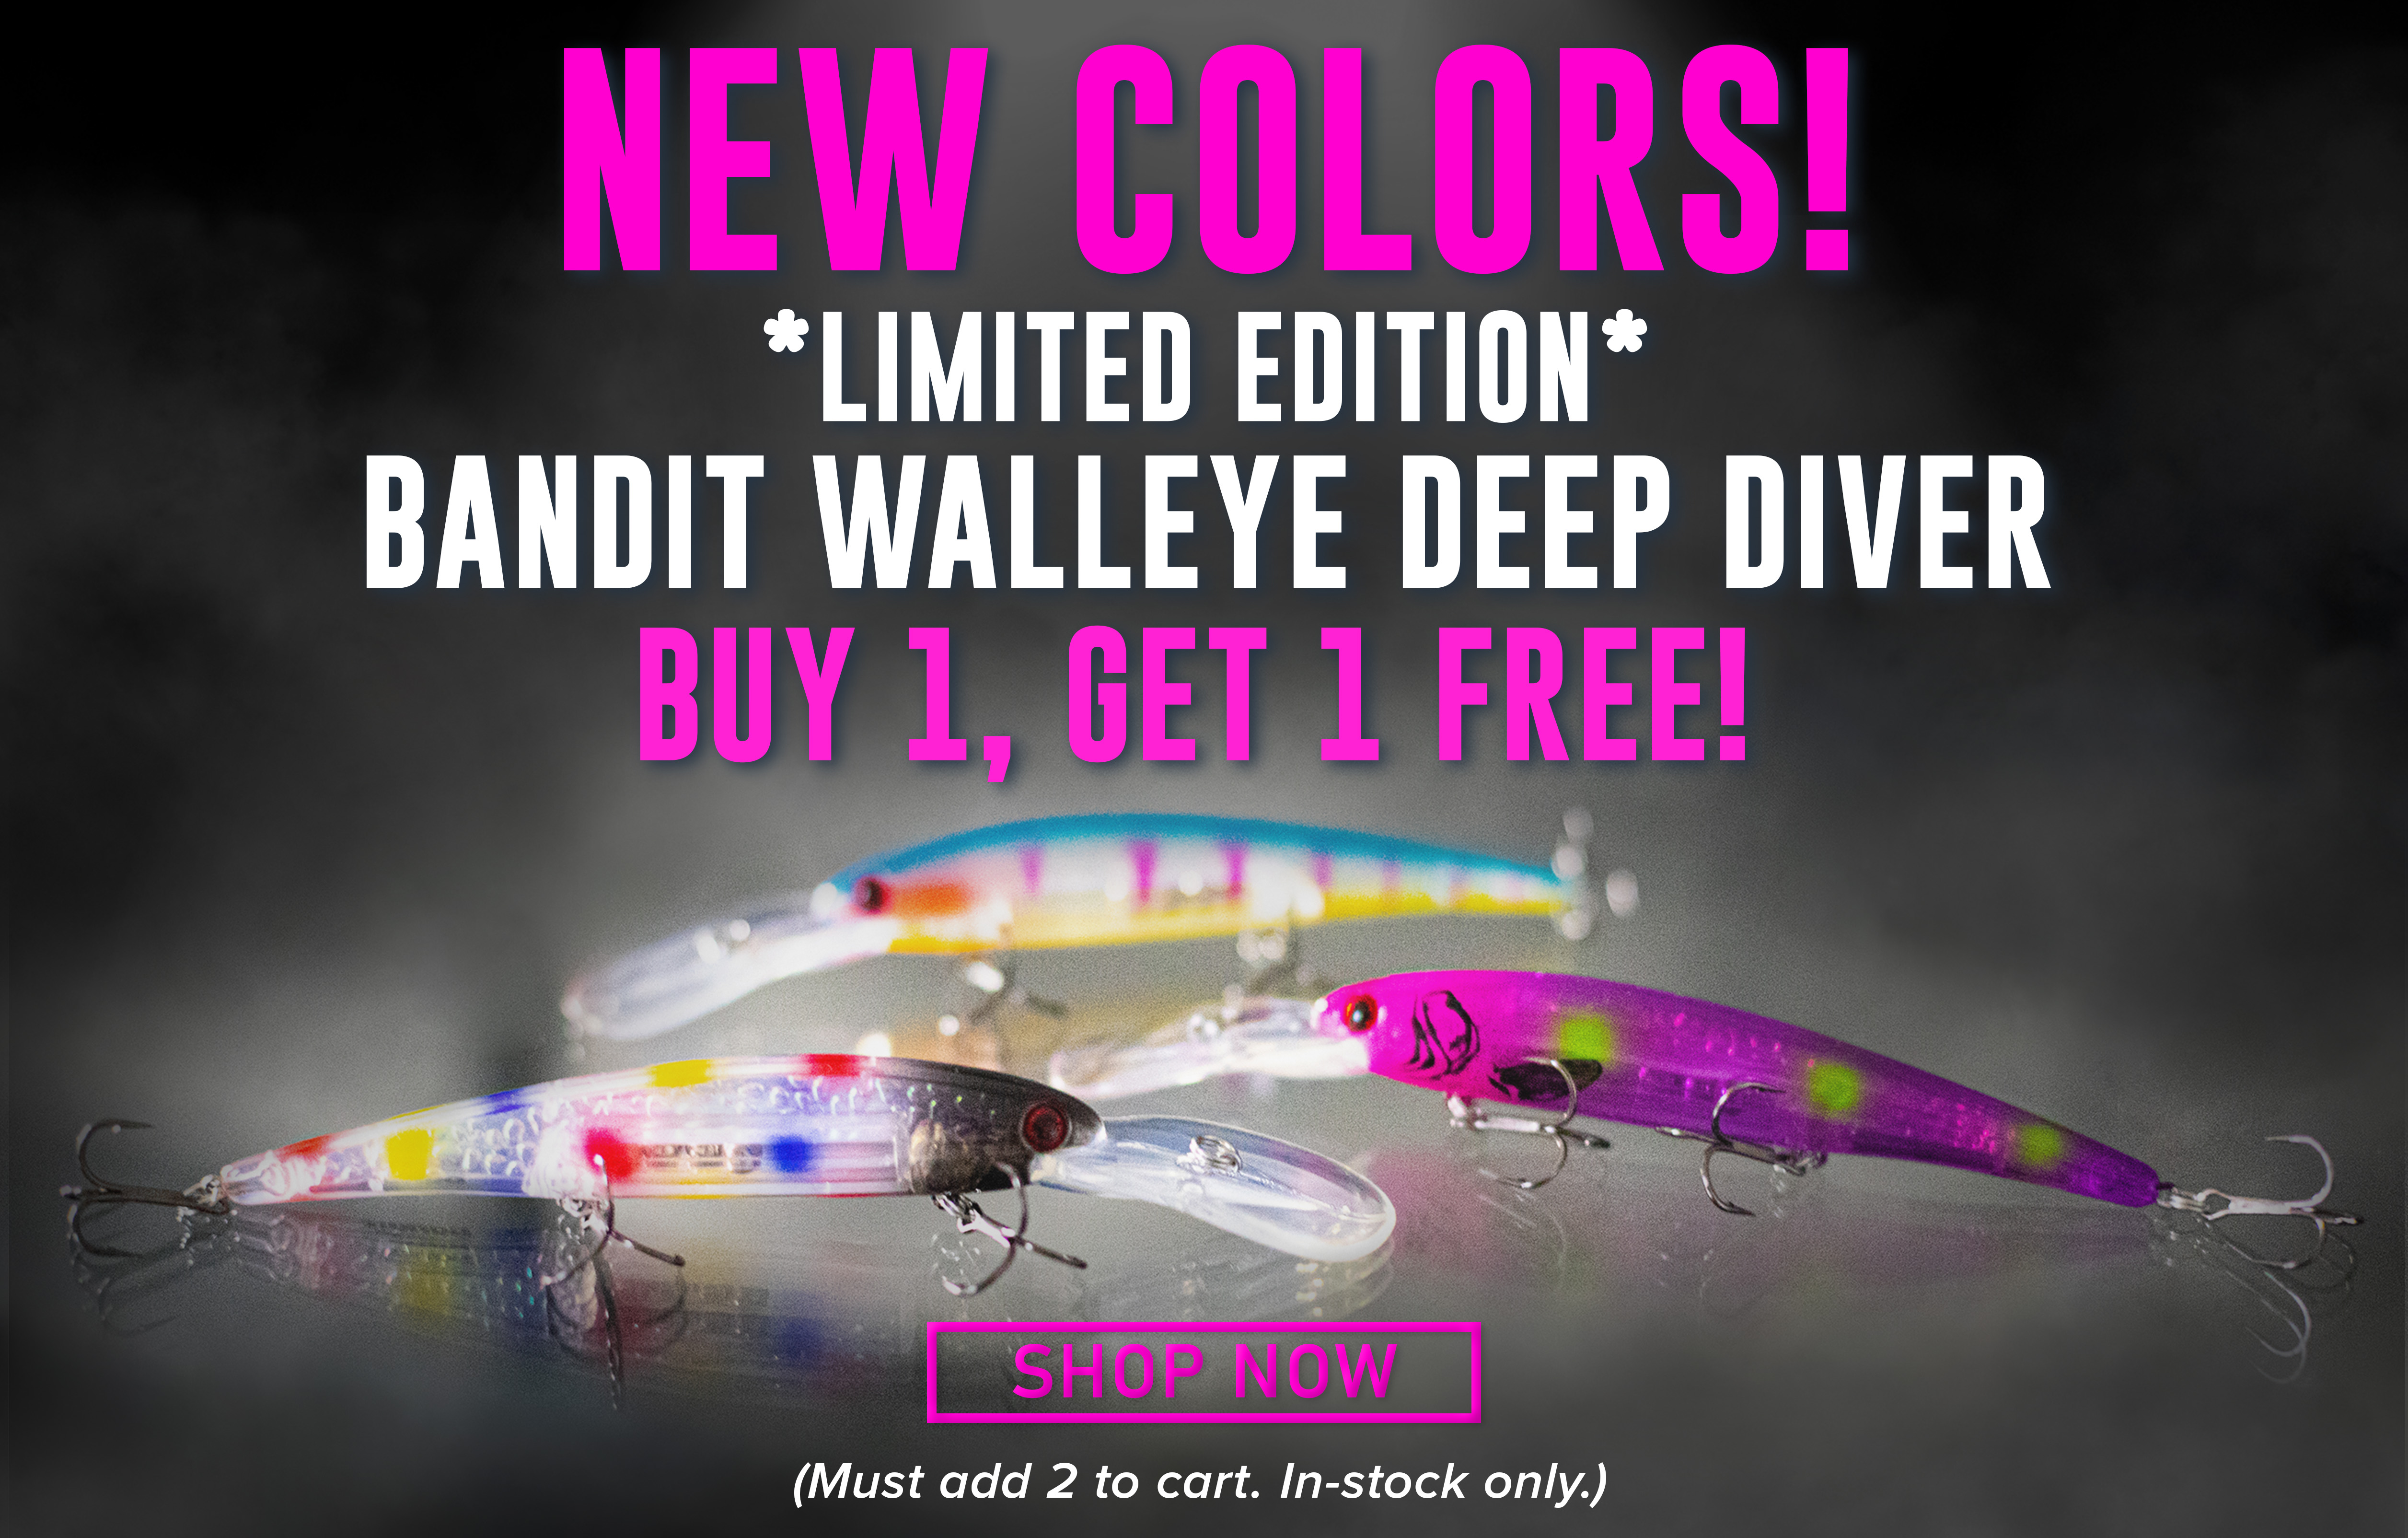 Buy 1, Get 1 Free Bandit Walleye Deep Diver Limited Edition! NEW COLORS  JUST ADDED! - Fish USA